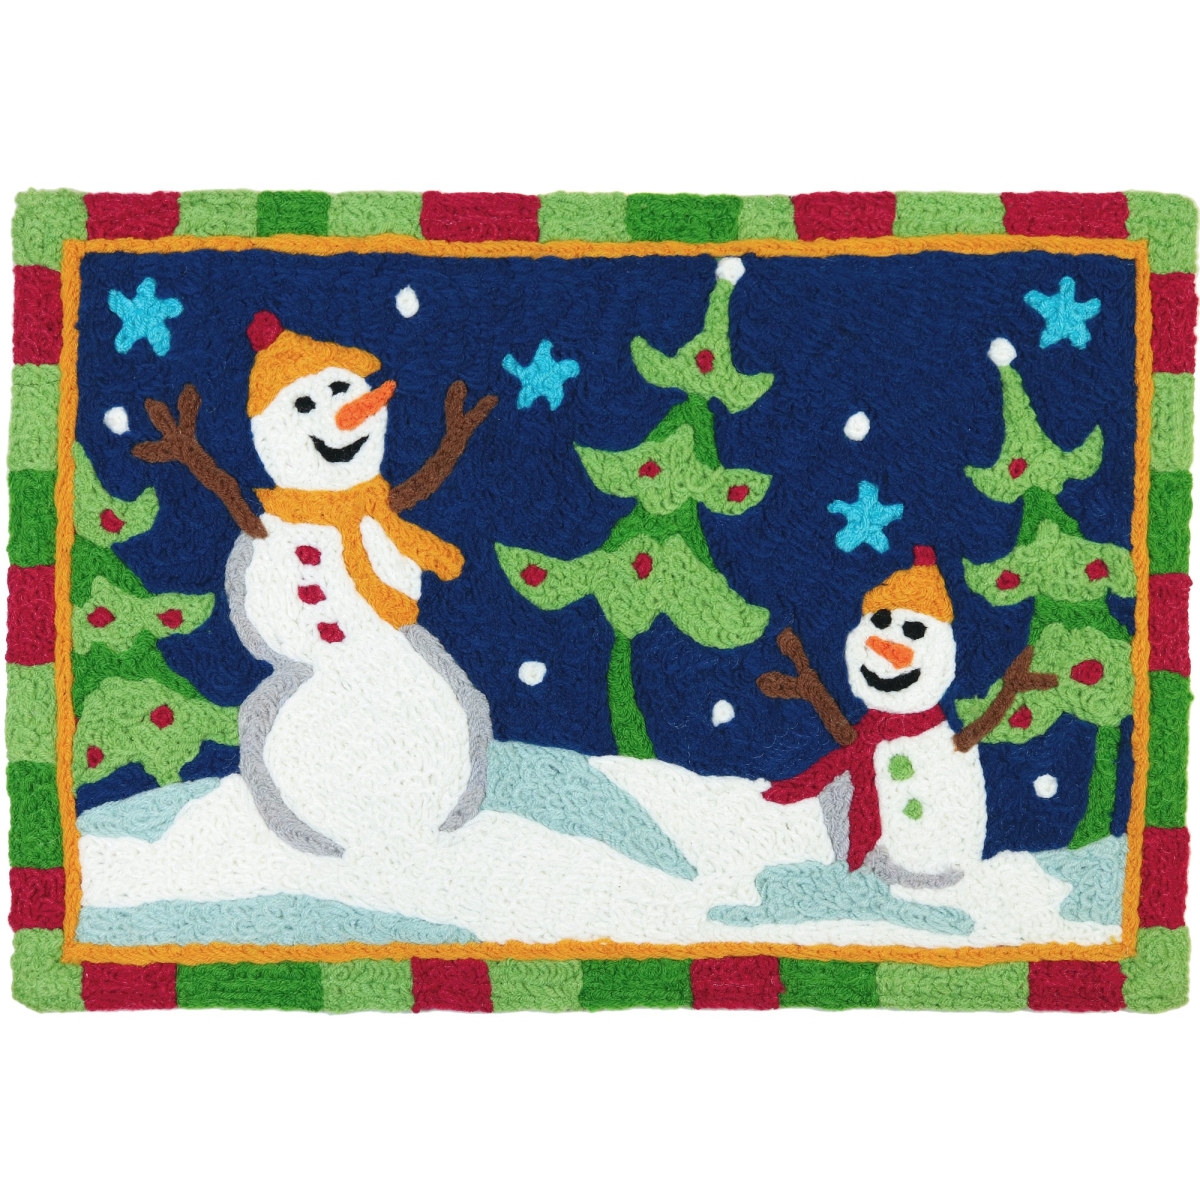 Perspectiva 20 x 30 in. Dancing Christmas Trees & Santa Accent Rug